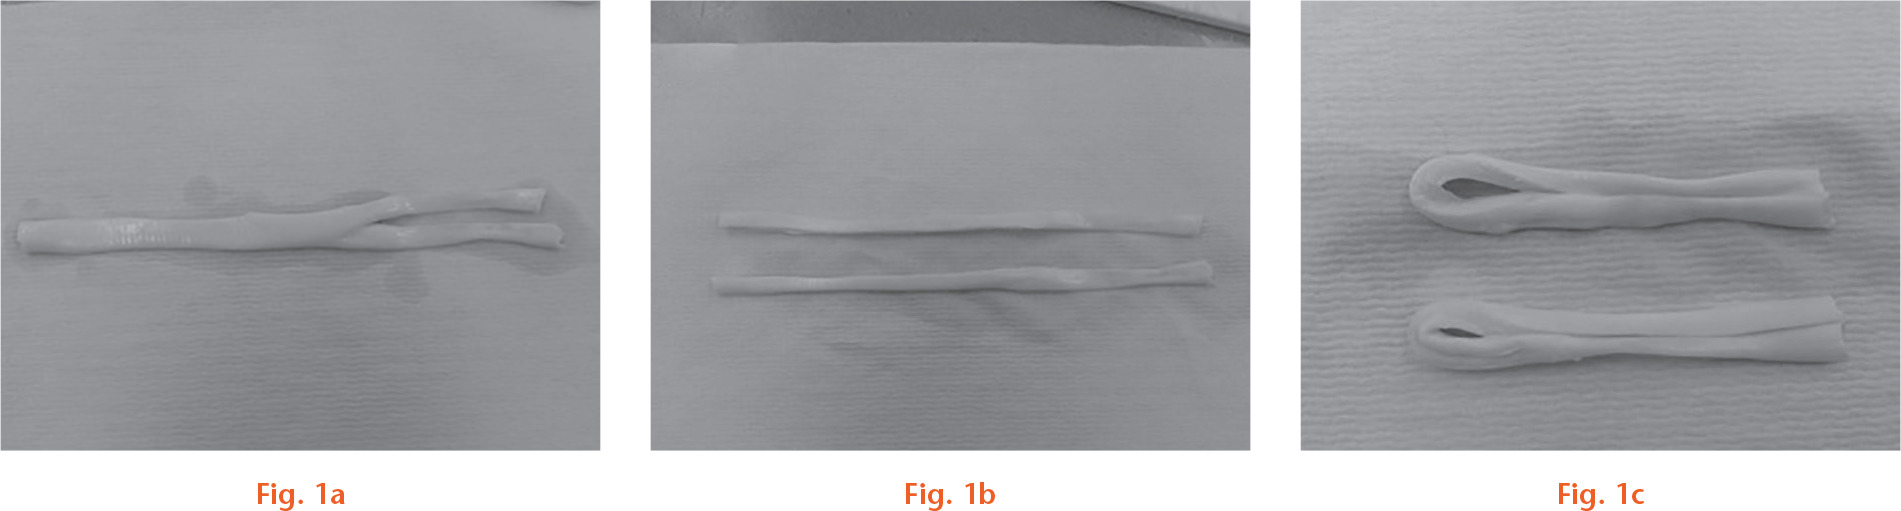 Fig. 1 
            a) Porcine superflexor tendons are harvested and decellularized. b) They are split along their long axis. c) This yields two potential double bundle anterior cruciate ligament grafts, which are trimmed down appropriately to the desired graft diameter.
          